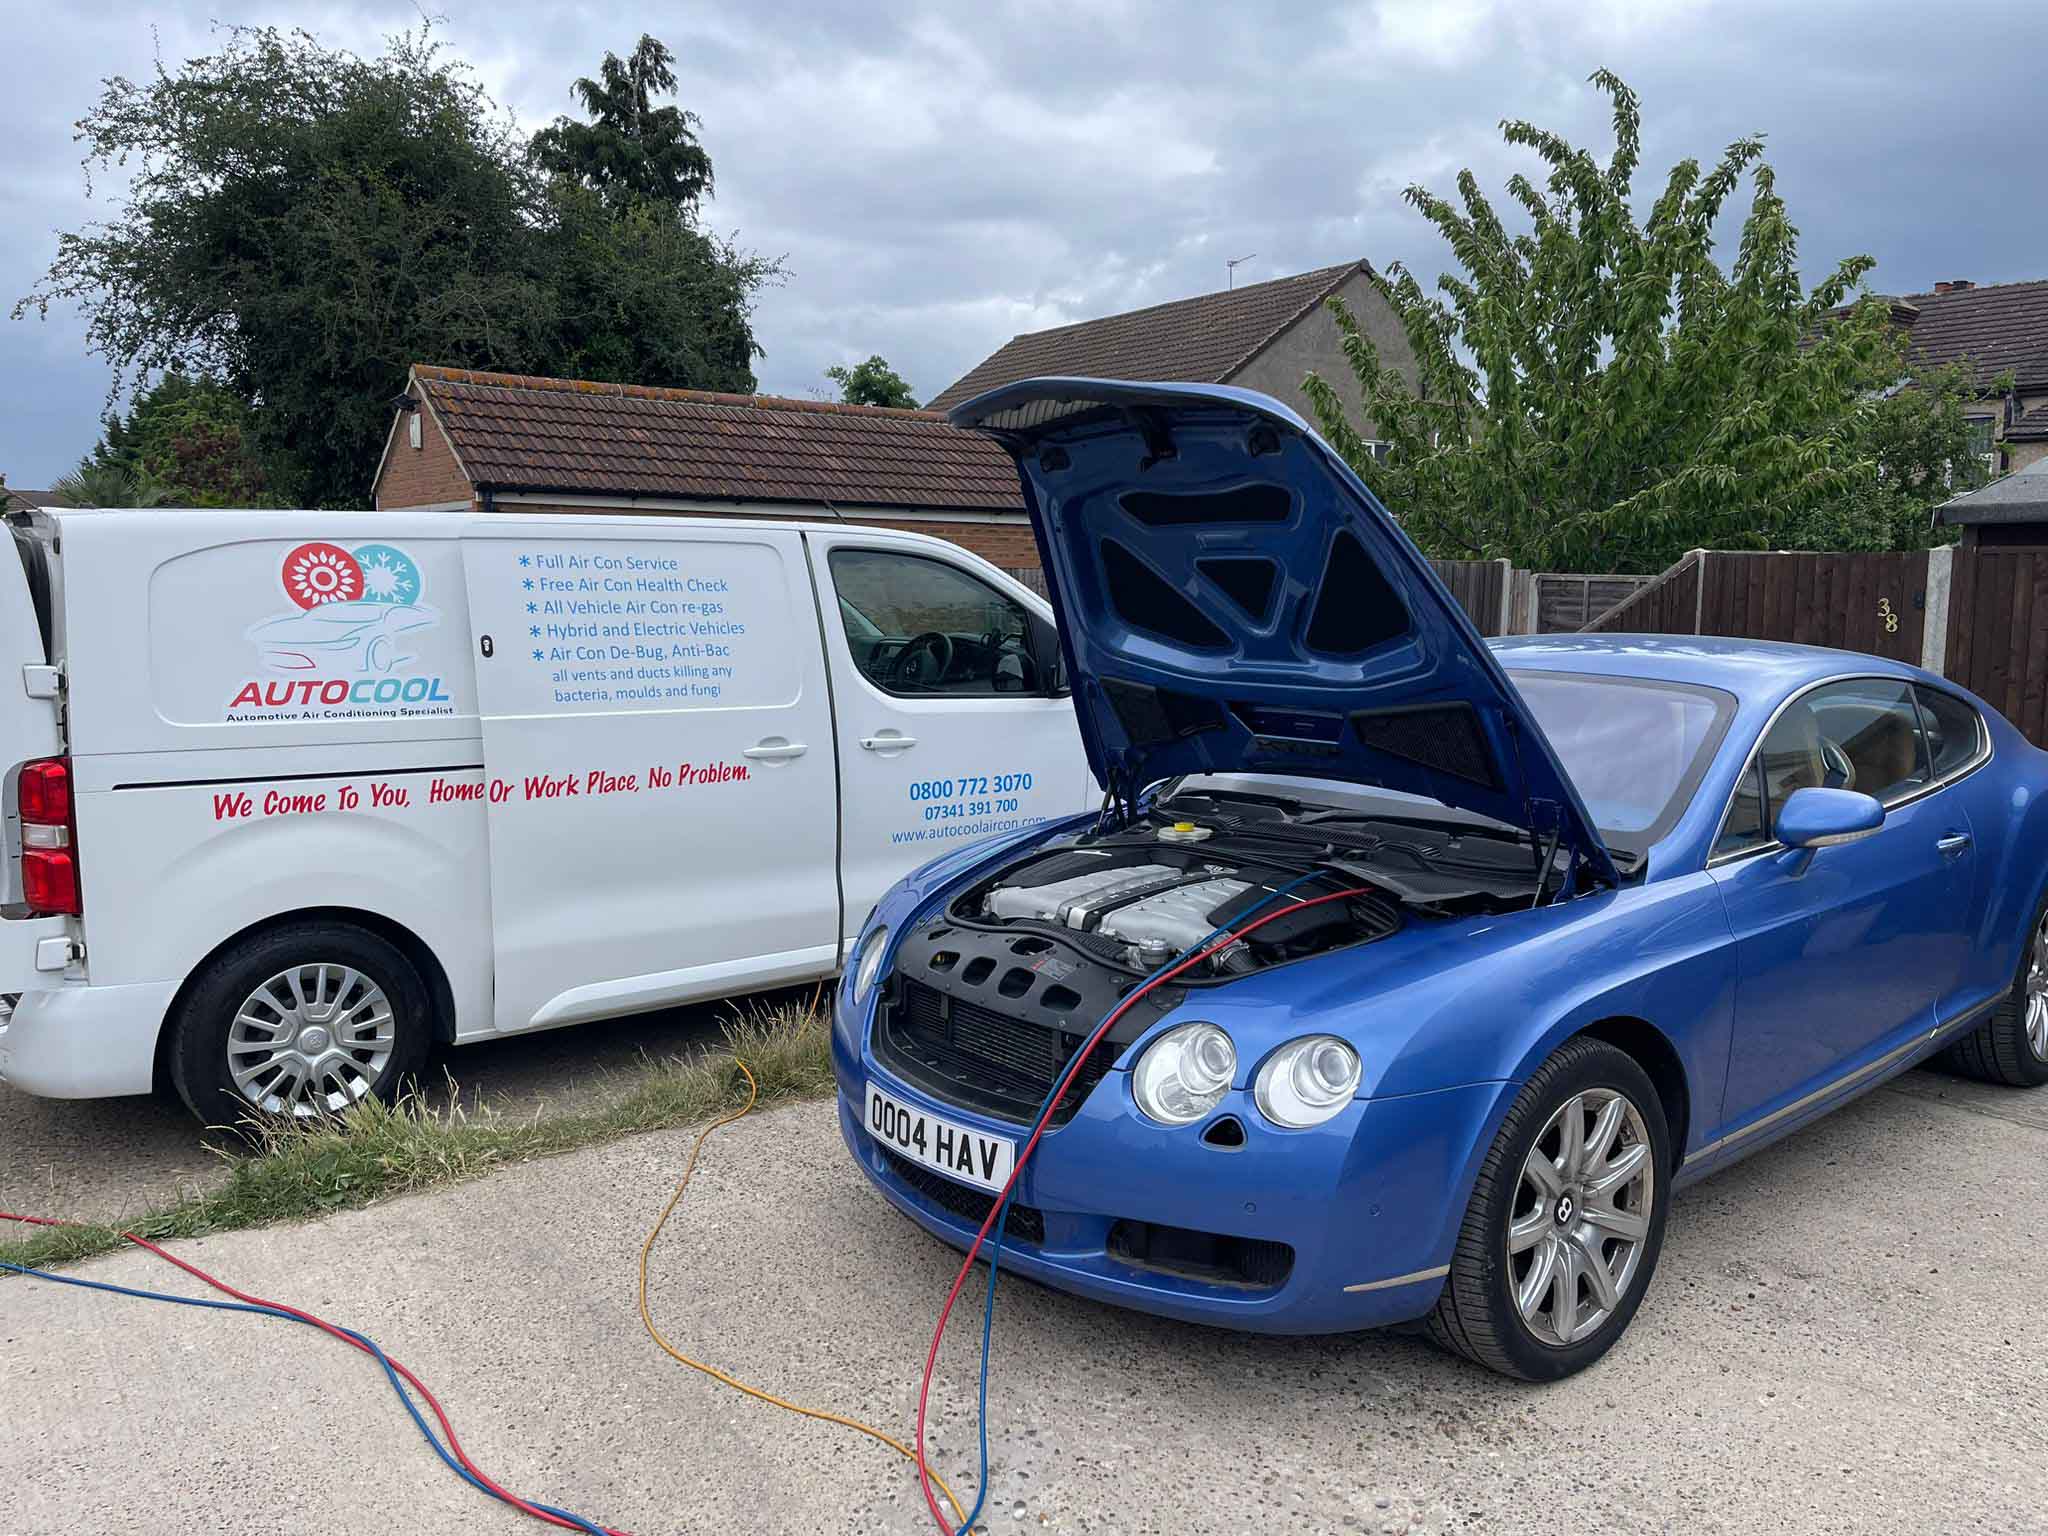 Autocool | Automotive Mobile Air Con and Ant Bac in Bromley and SE London | Car and van